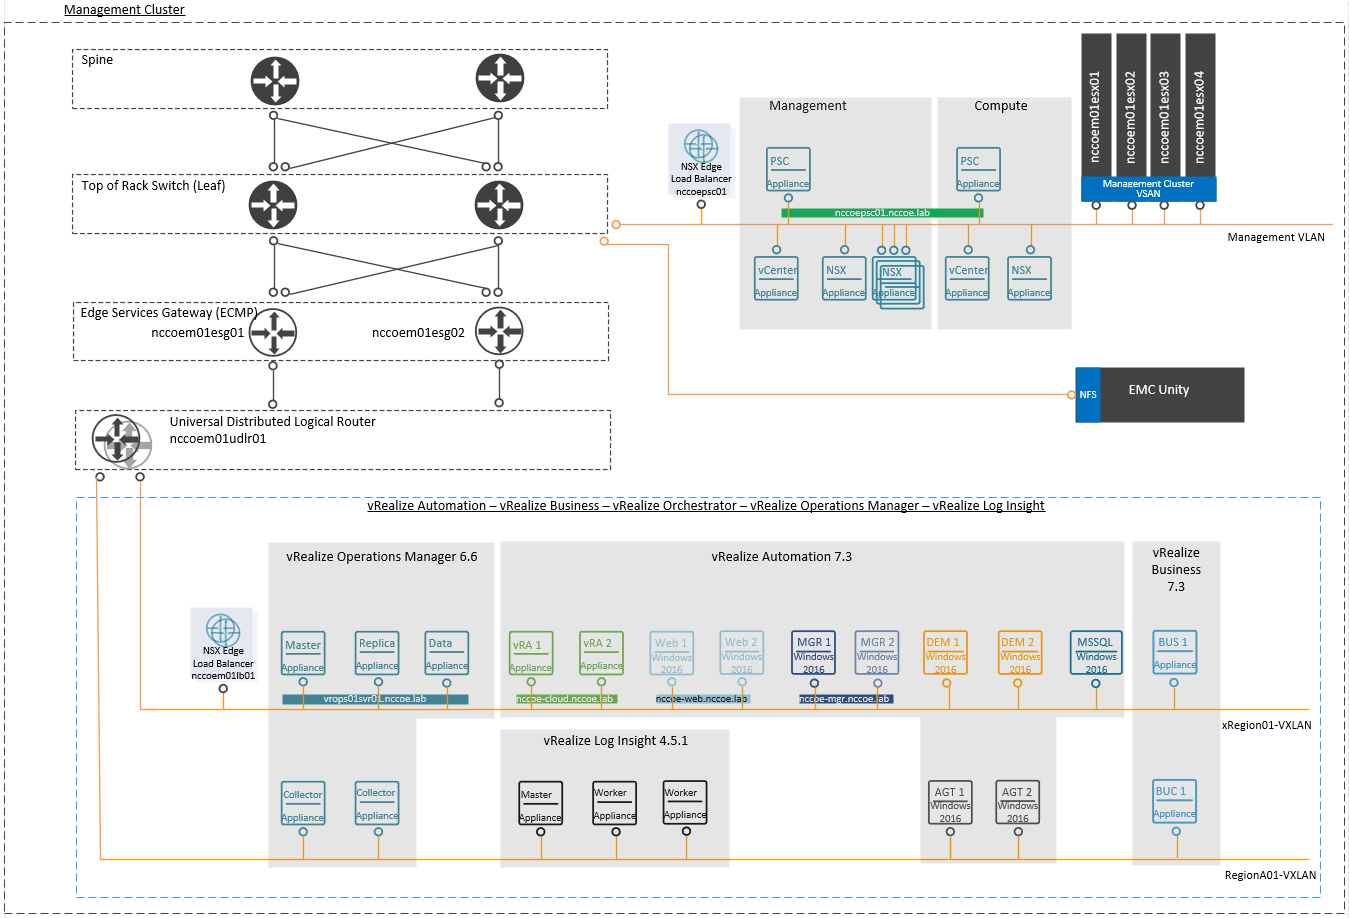 This figure depicts the VMware management cluster architecture.